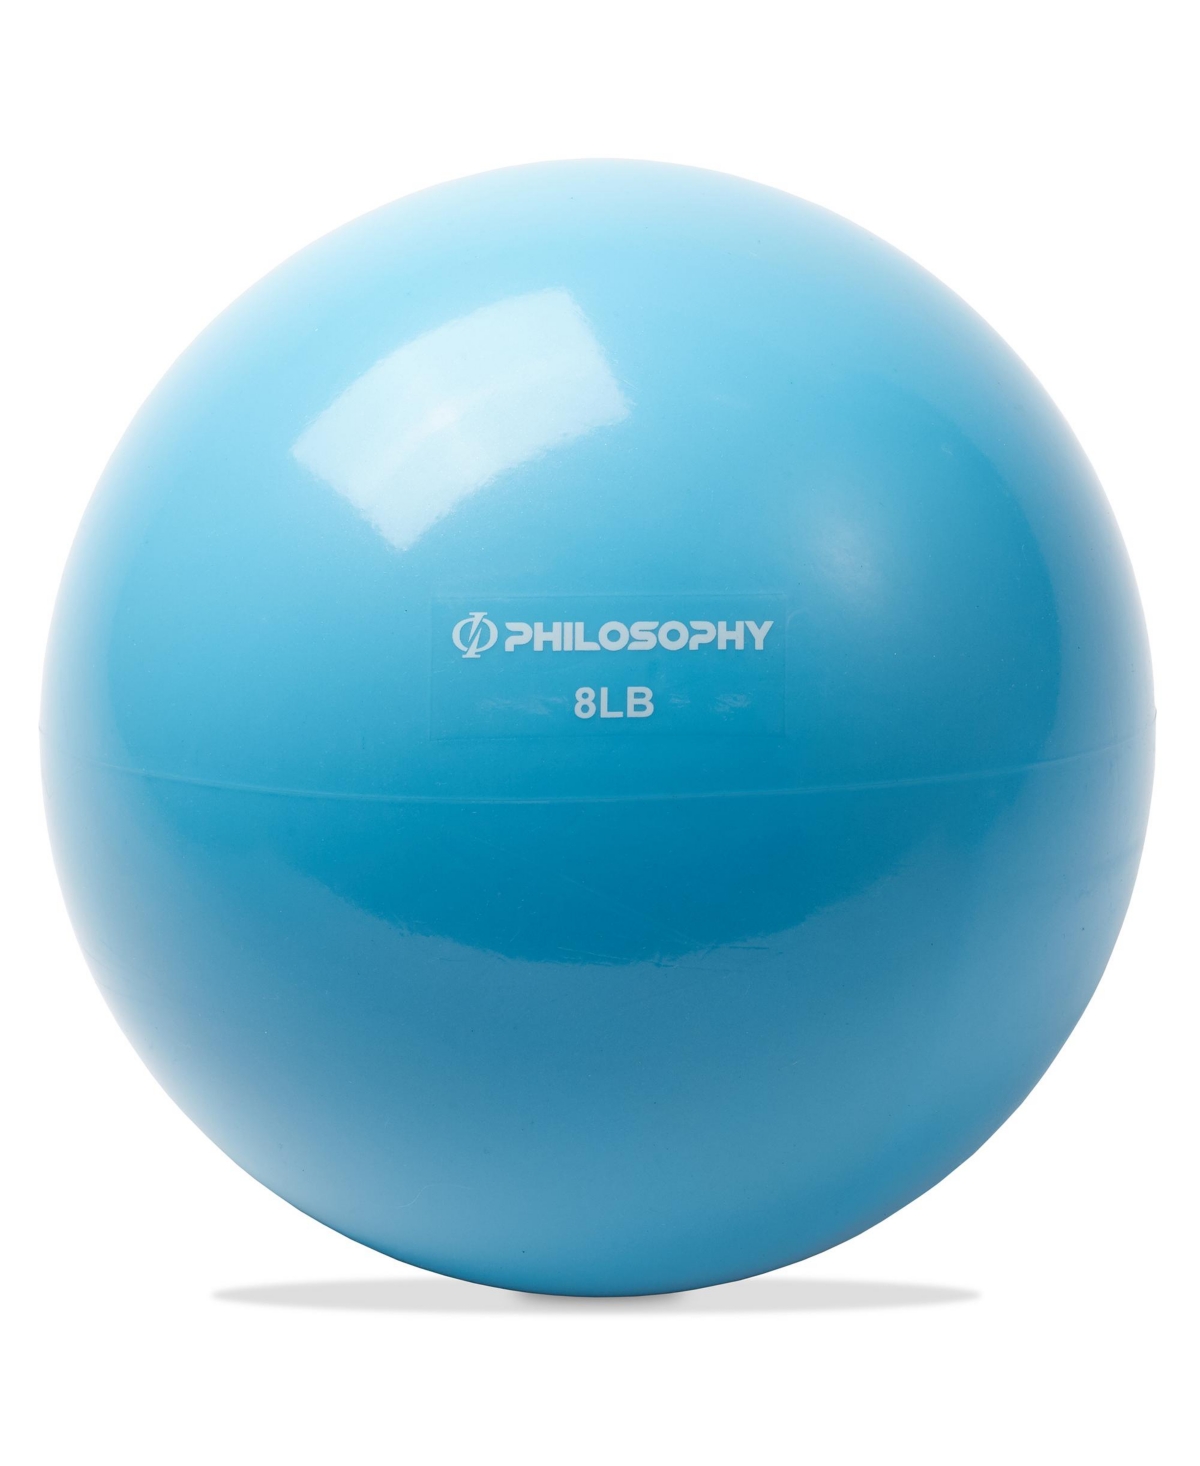 Toning Ball, 8 Lb, Blue - Soft Weighted Mini Medicine Ball - Blue